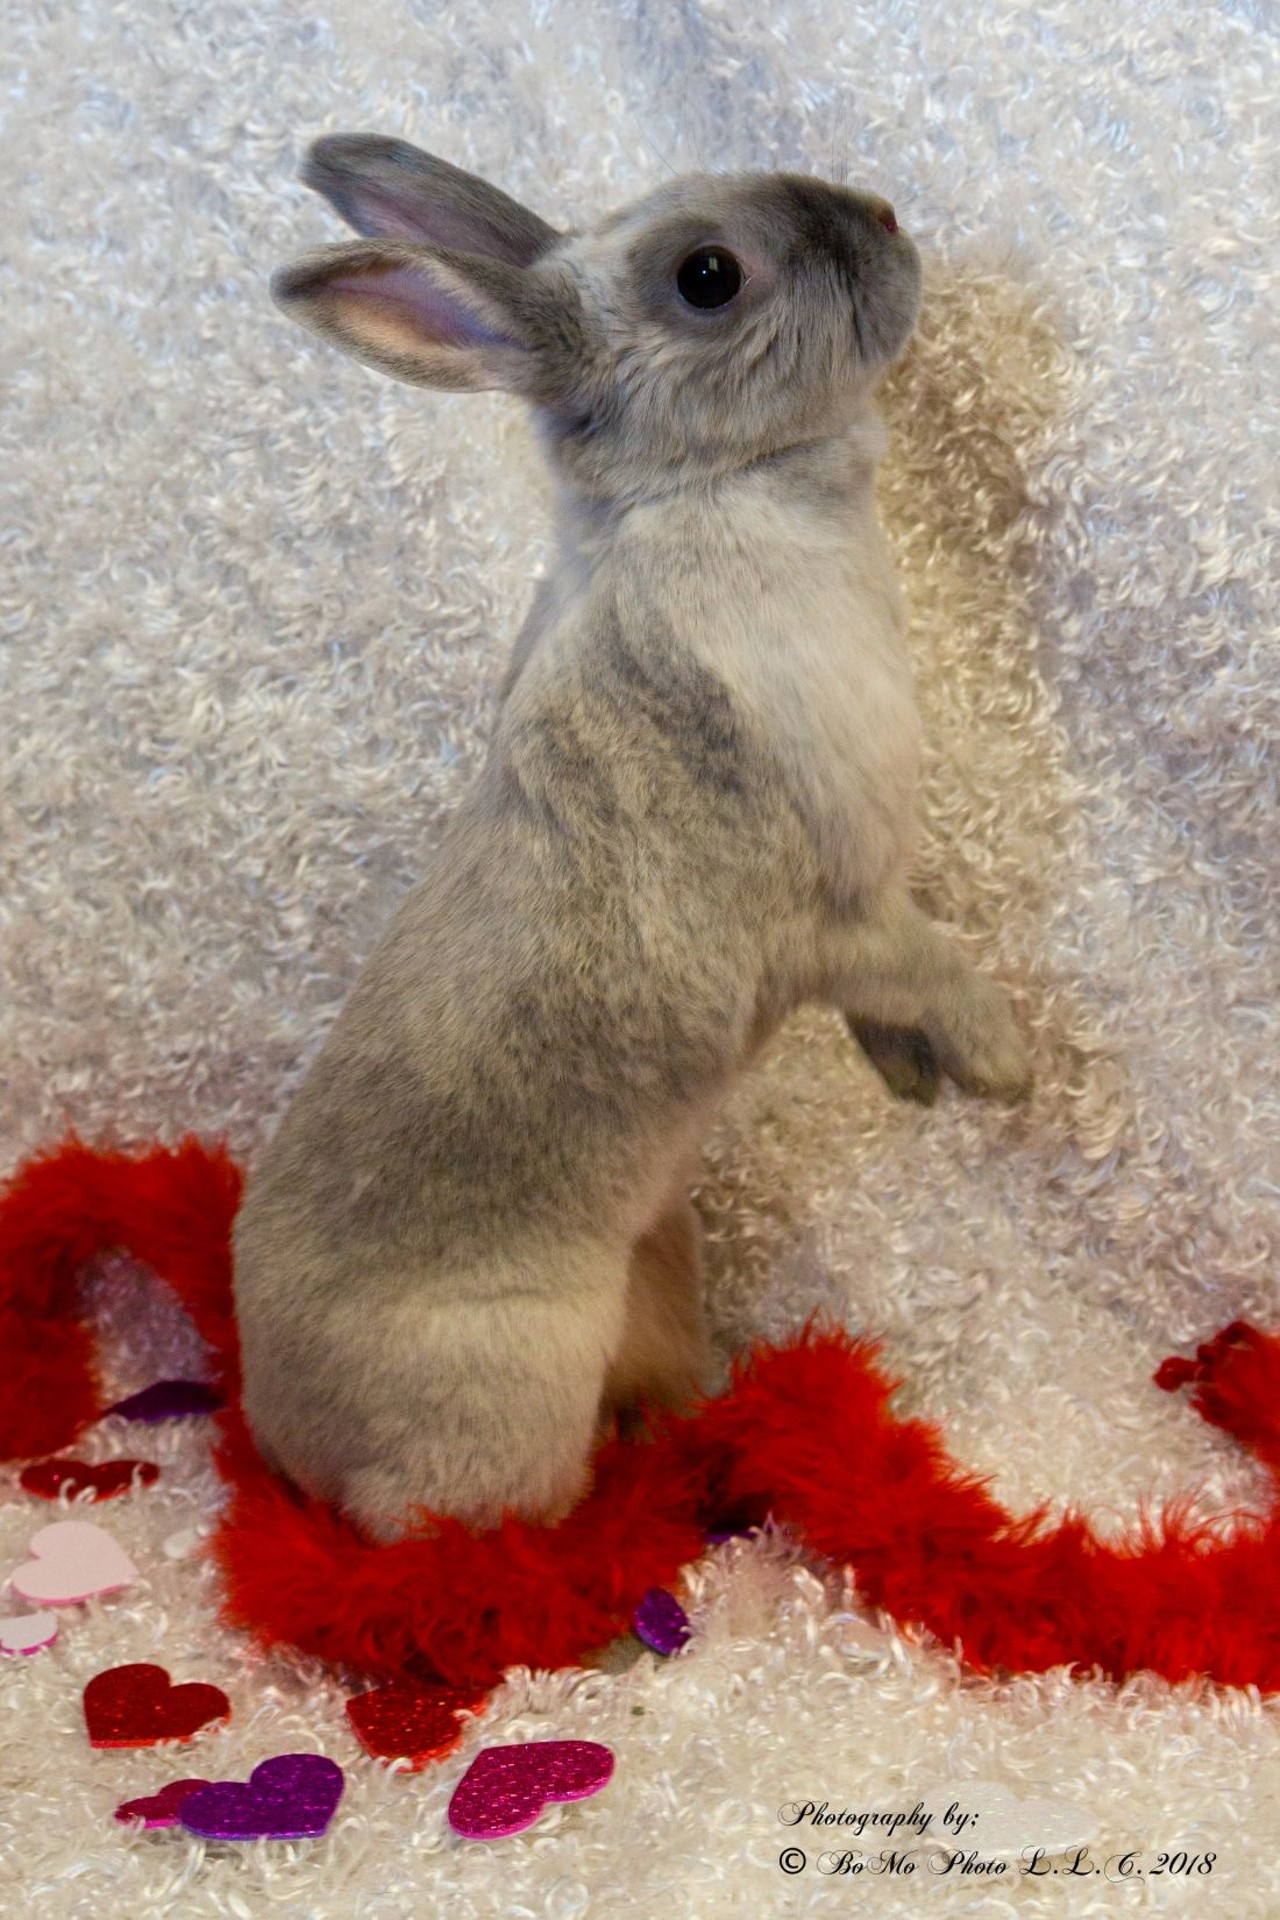 NAME: Regina
GENDER: Female
BREED: Netherland Dwarf
AGE: 3 years, 1 month
WEIGHT: 3 pounds
SPECIAL CONSIDERATIONS: None
REASON I CAME TO MHS: Owner surrender
LOCATION: Berman Center for Animal Care in Westland
ID NUMBER: 862398